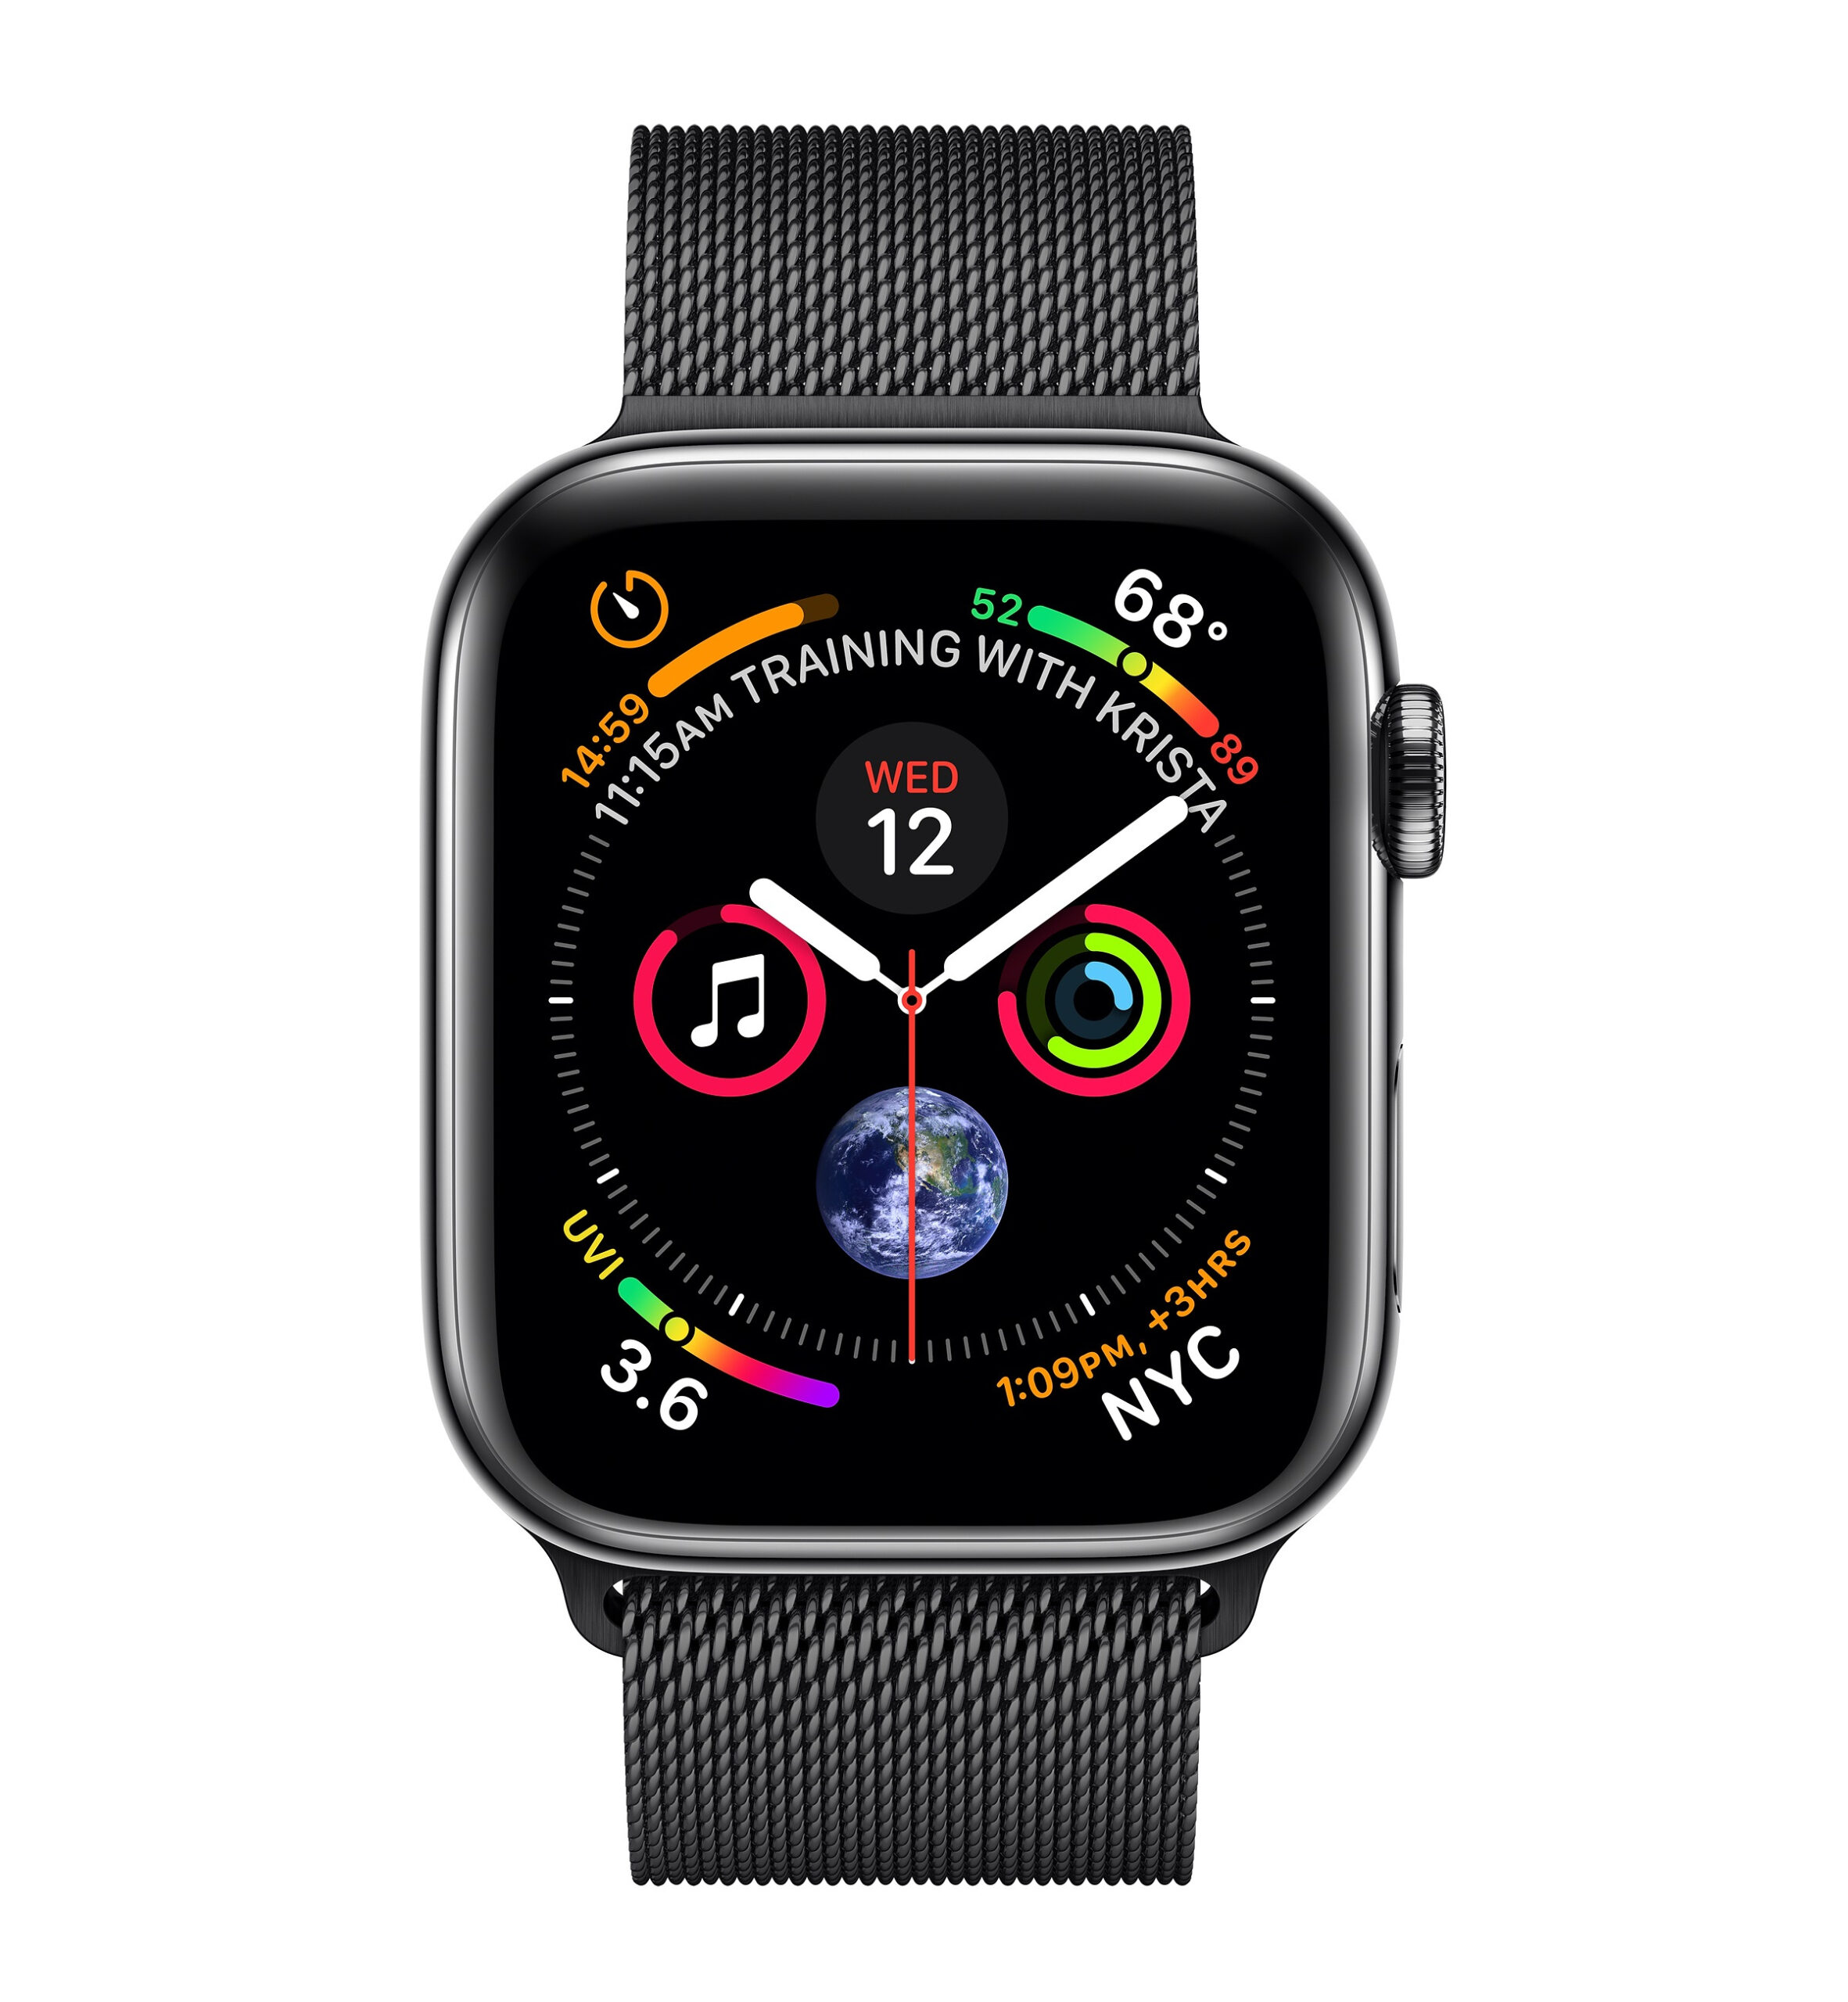 MTV62LL/A - $658 - Apple Watch Series 4 (GPS + Cellular, 44mm, Space Black Stainless Steel 